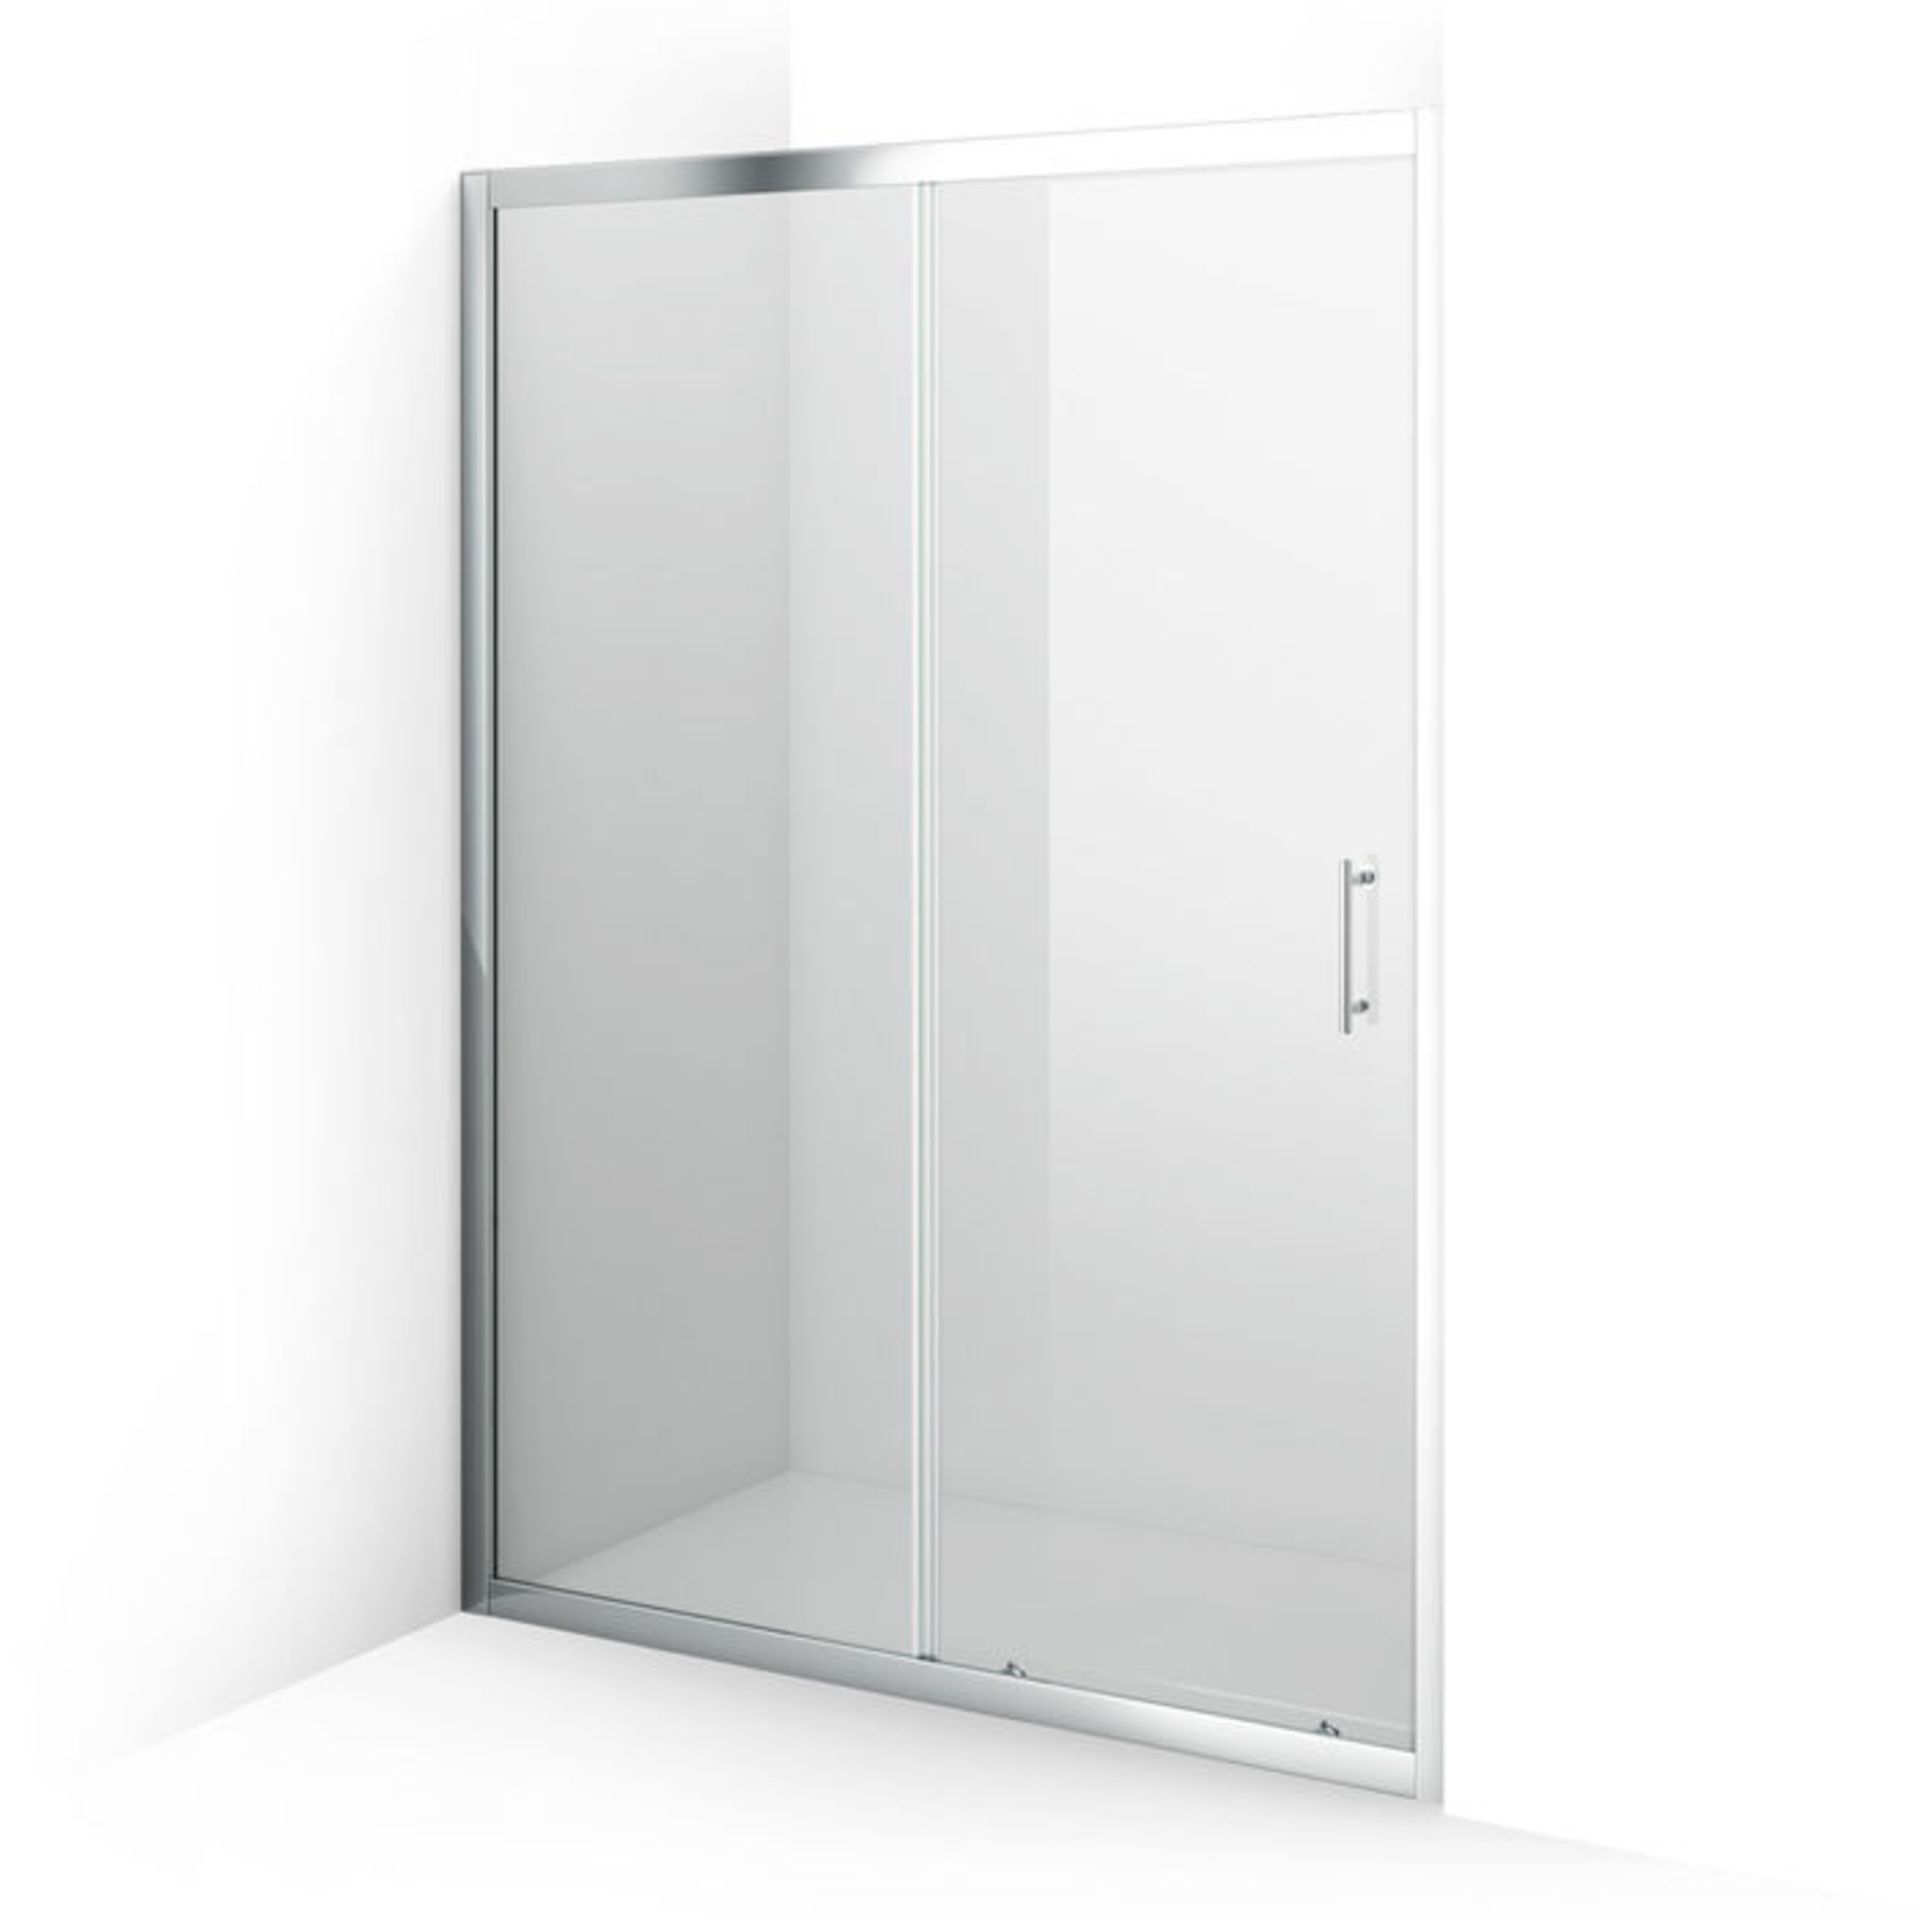 (XM153) 1400mm - 6mm - Elements Sliding Shower Door. RRP £299.99. 6mm Safety Glass Fully - Image 4 of 4